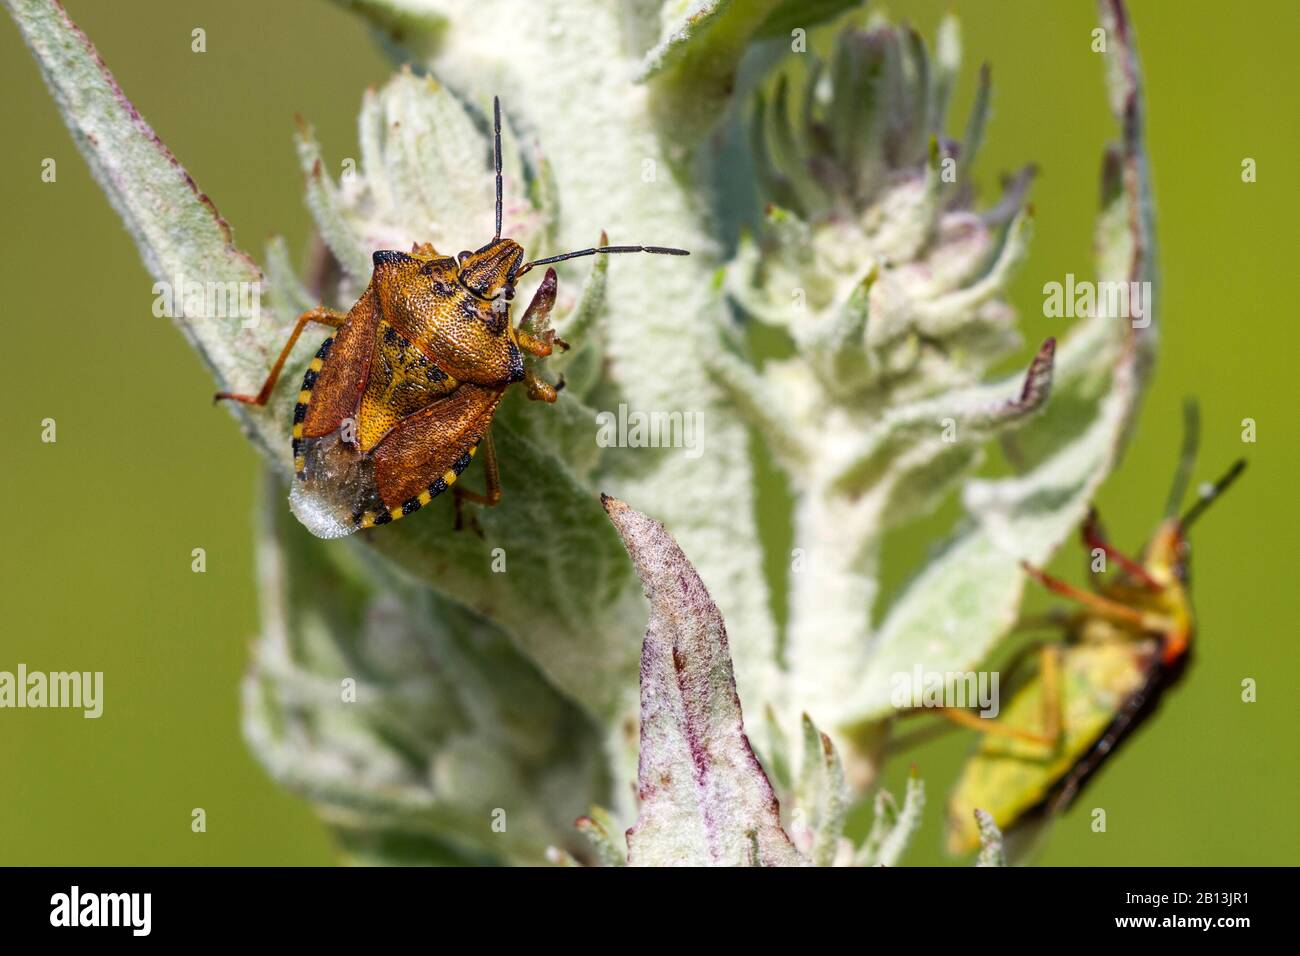 Black-shouldered Shield Bug (Carpocoris purpureipennis), sitting at an inflorescence, view from above, Germany, Baden-Wuerttemberg Stock Photo